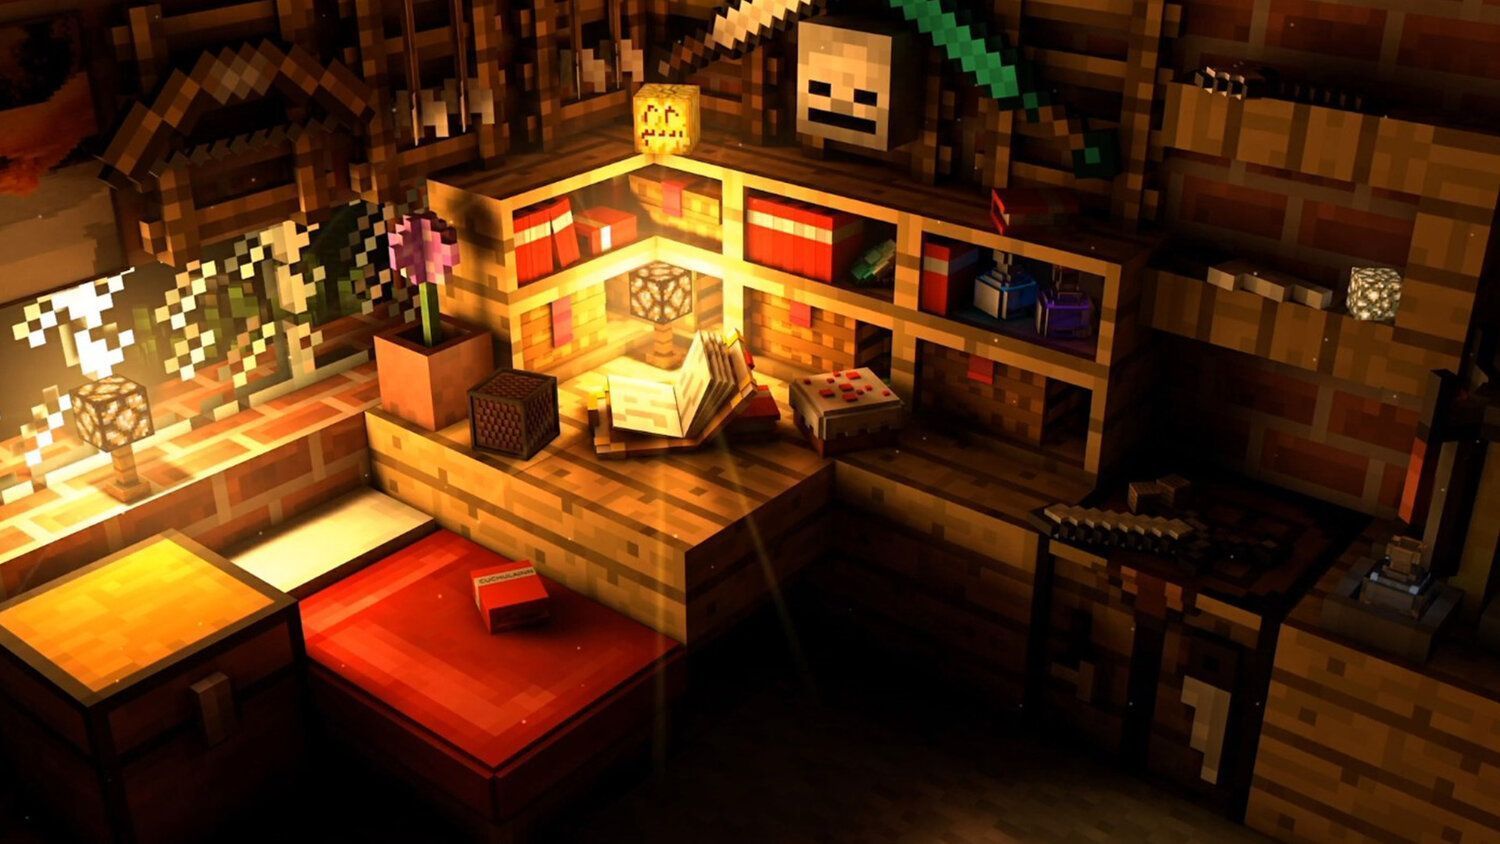 The minecraft room with a table and some furniture - Minecraft